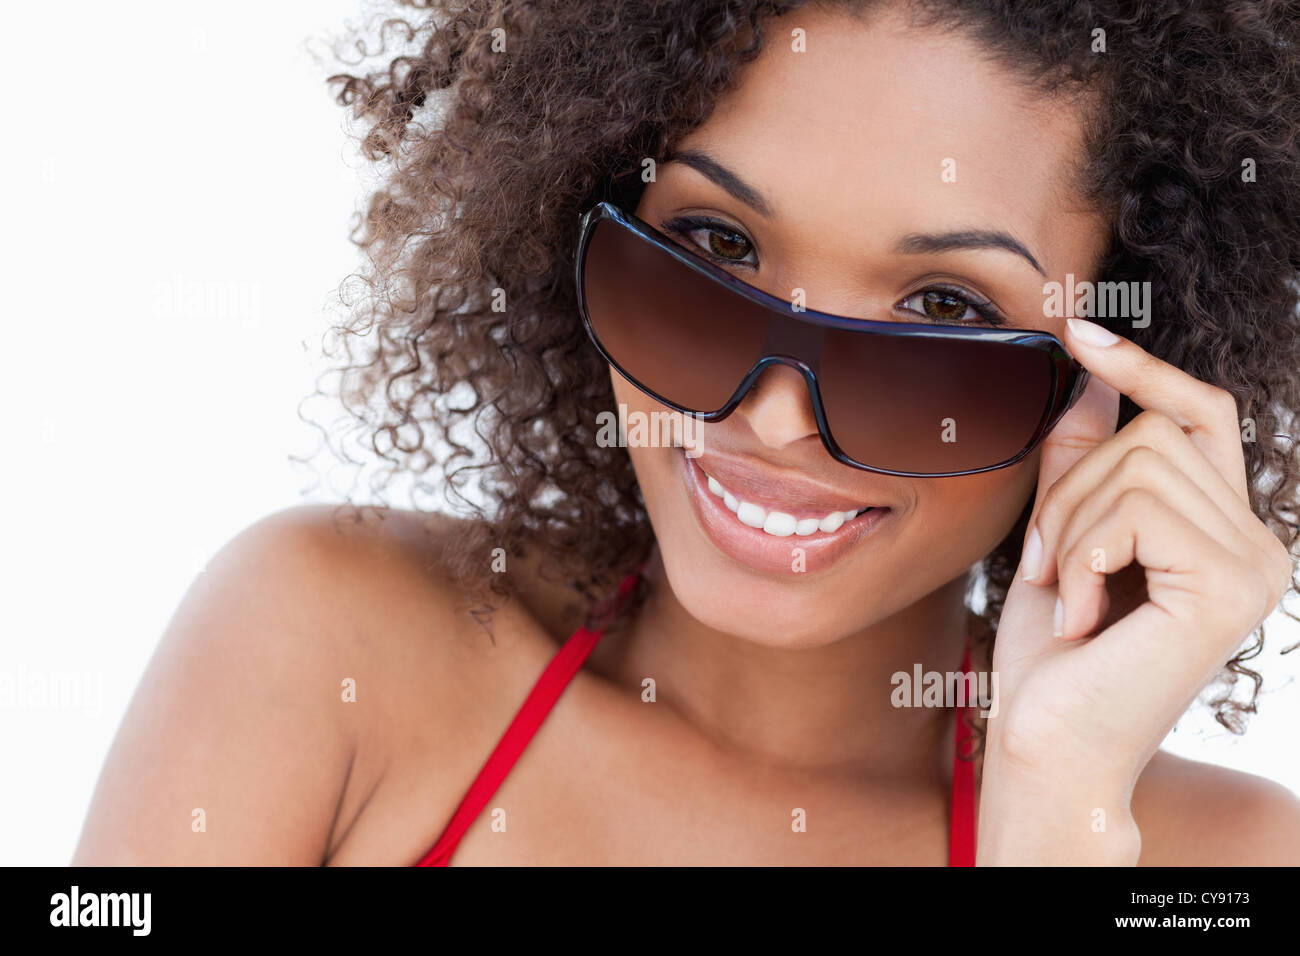 Smiling young brunette looking over her sunglasses Stock Photo